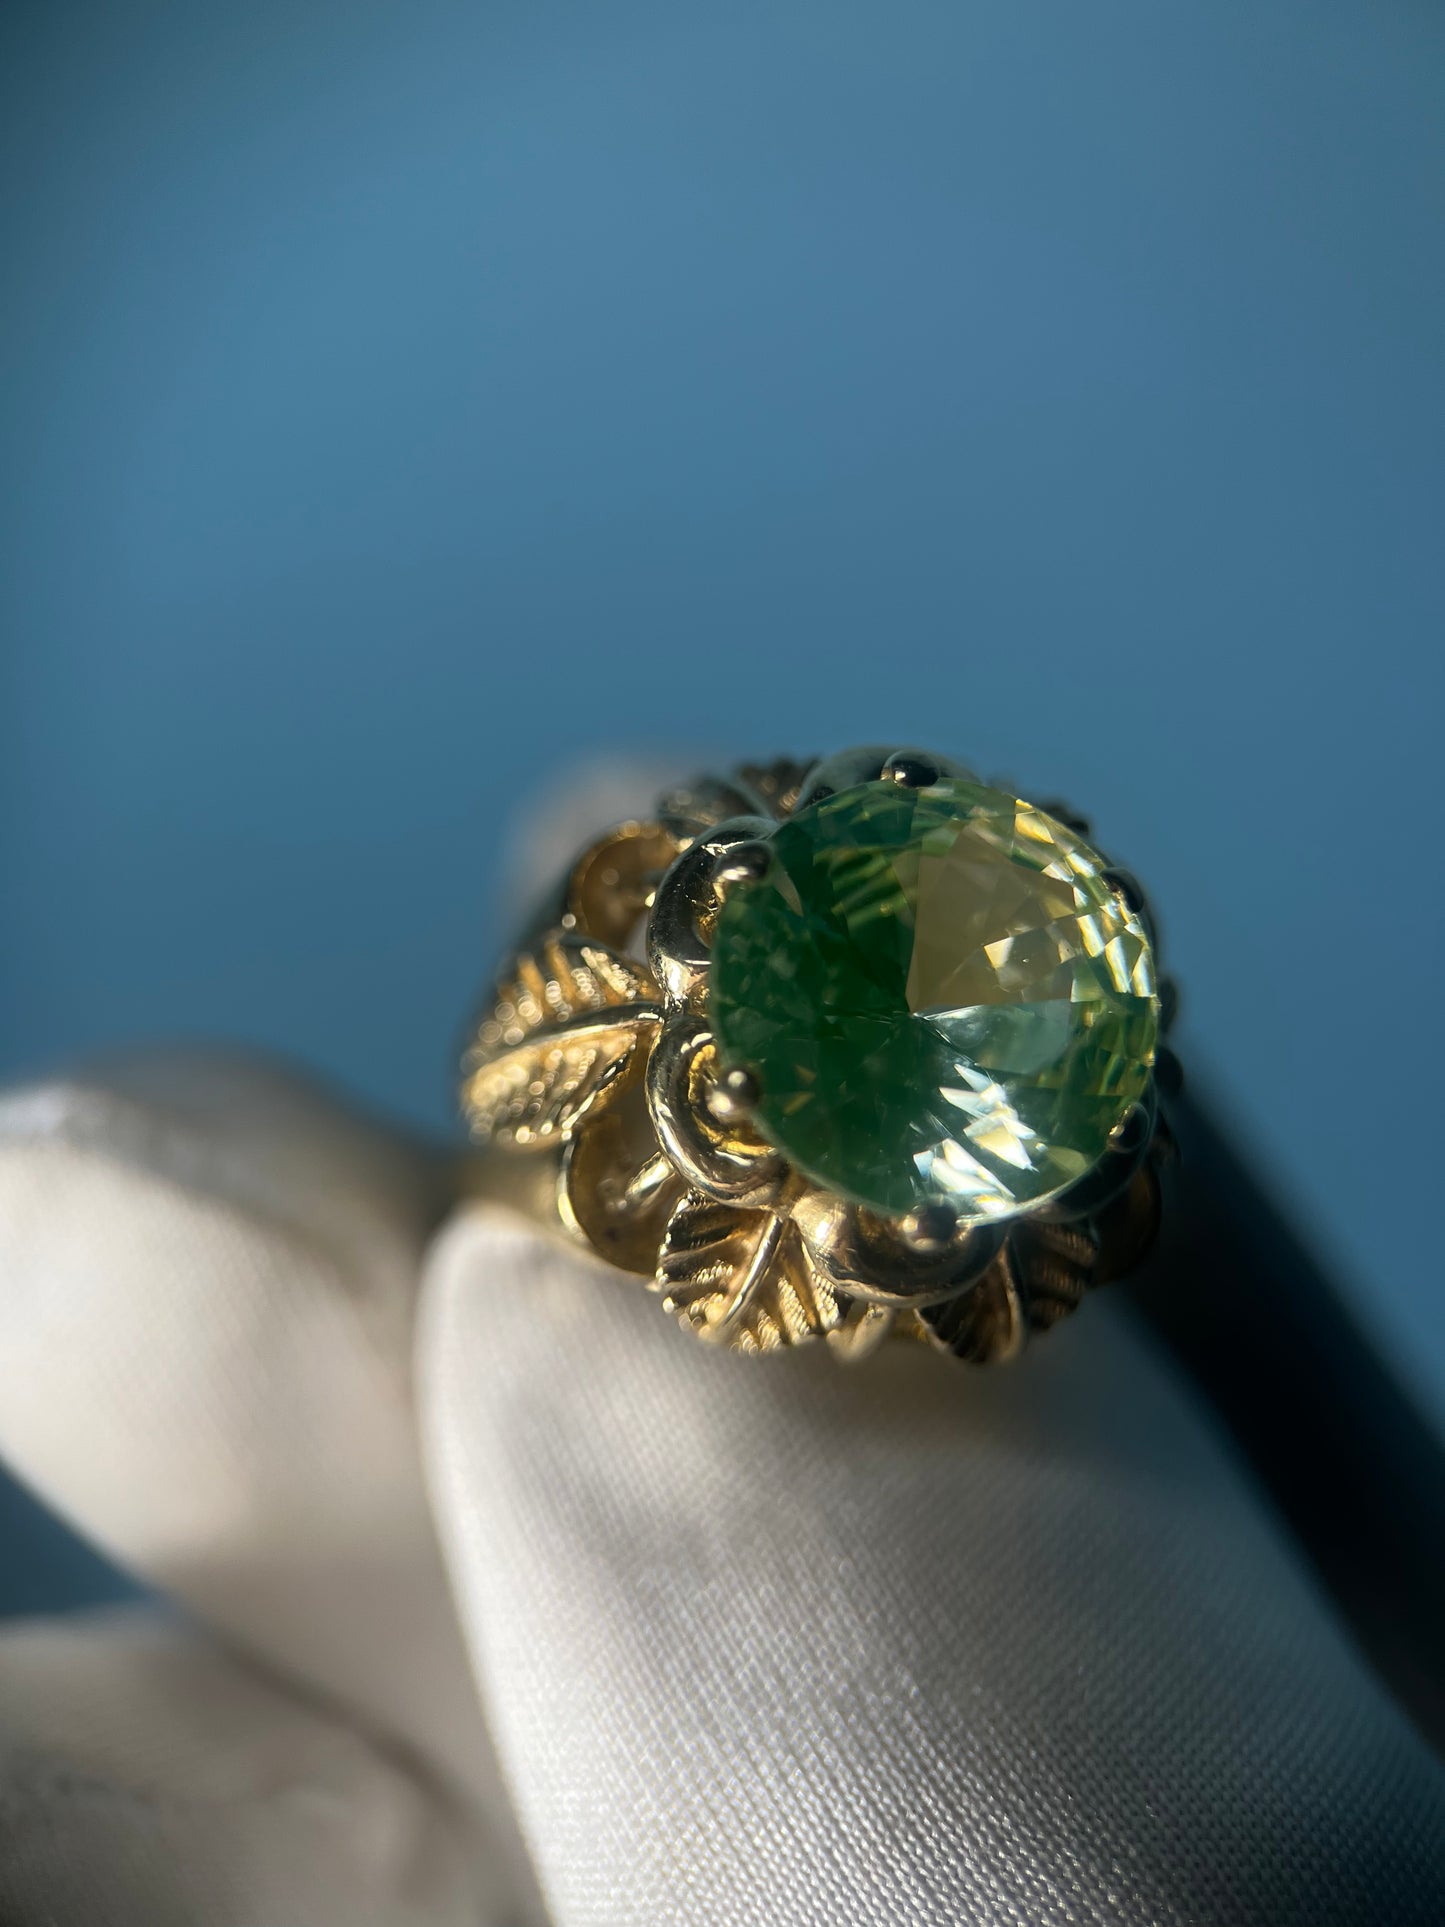 1930’s Leafy Natural Prasiolite Cocktail Ring in 18k Yellow Gold